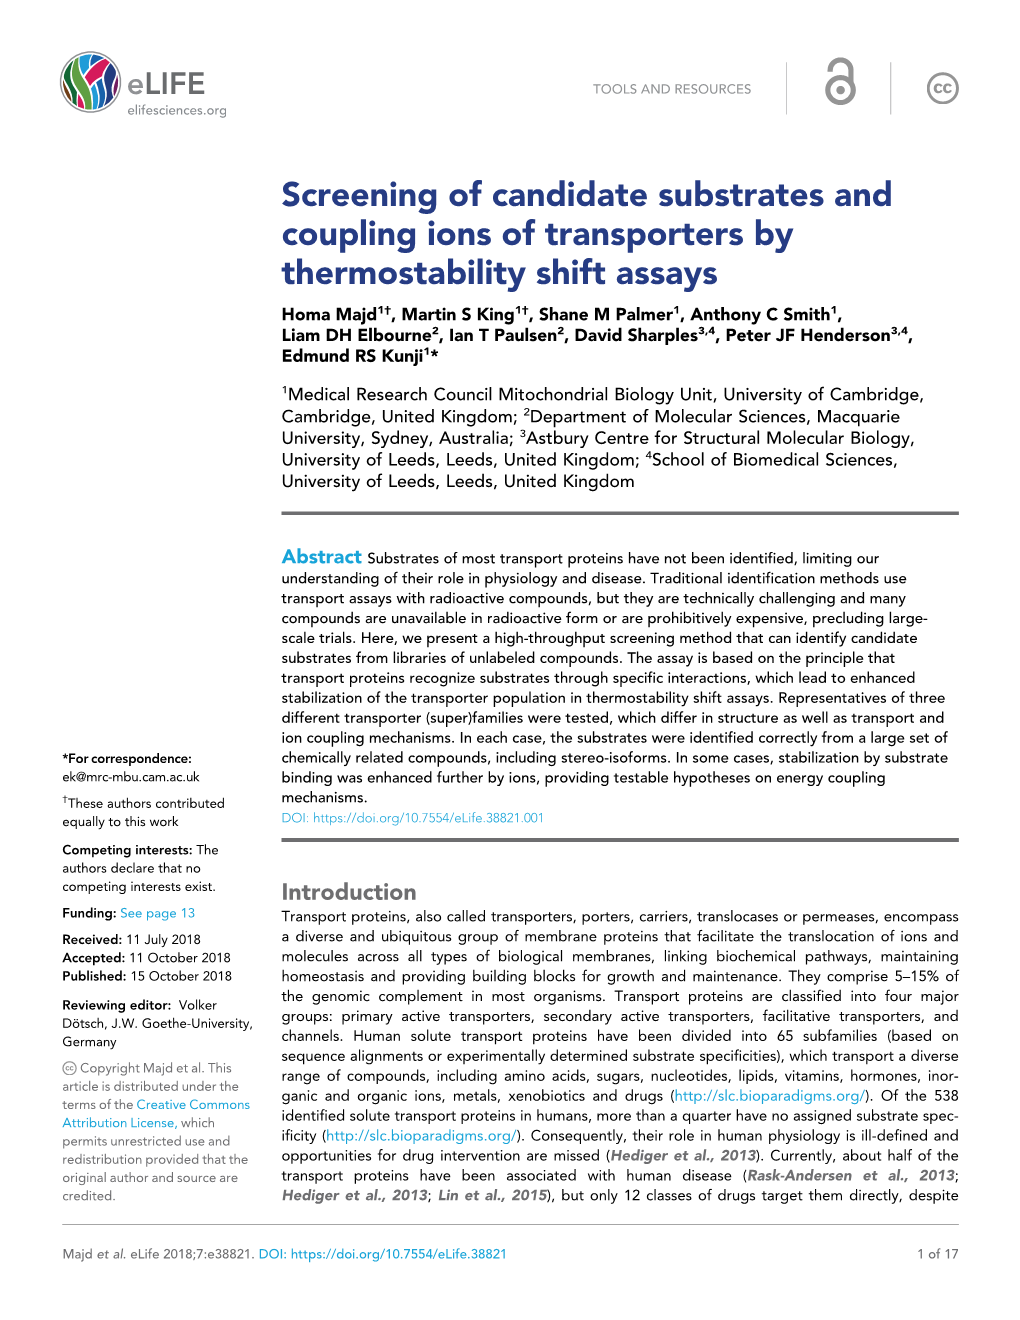 Screening of Candidate Substrates and Coupling Ions of Transporters By